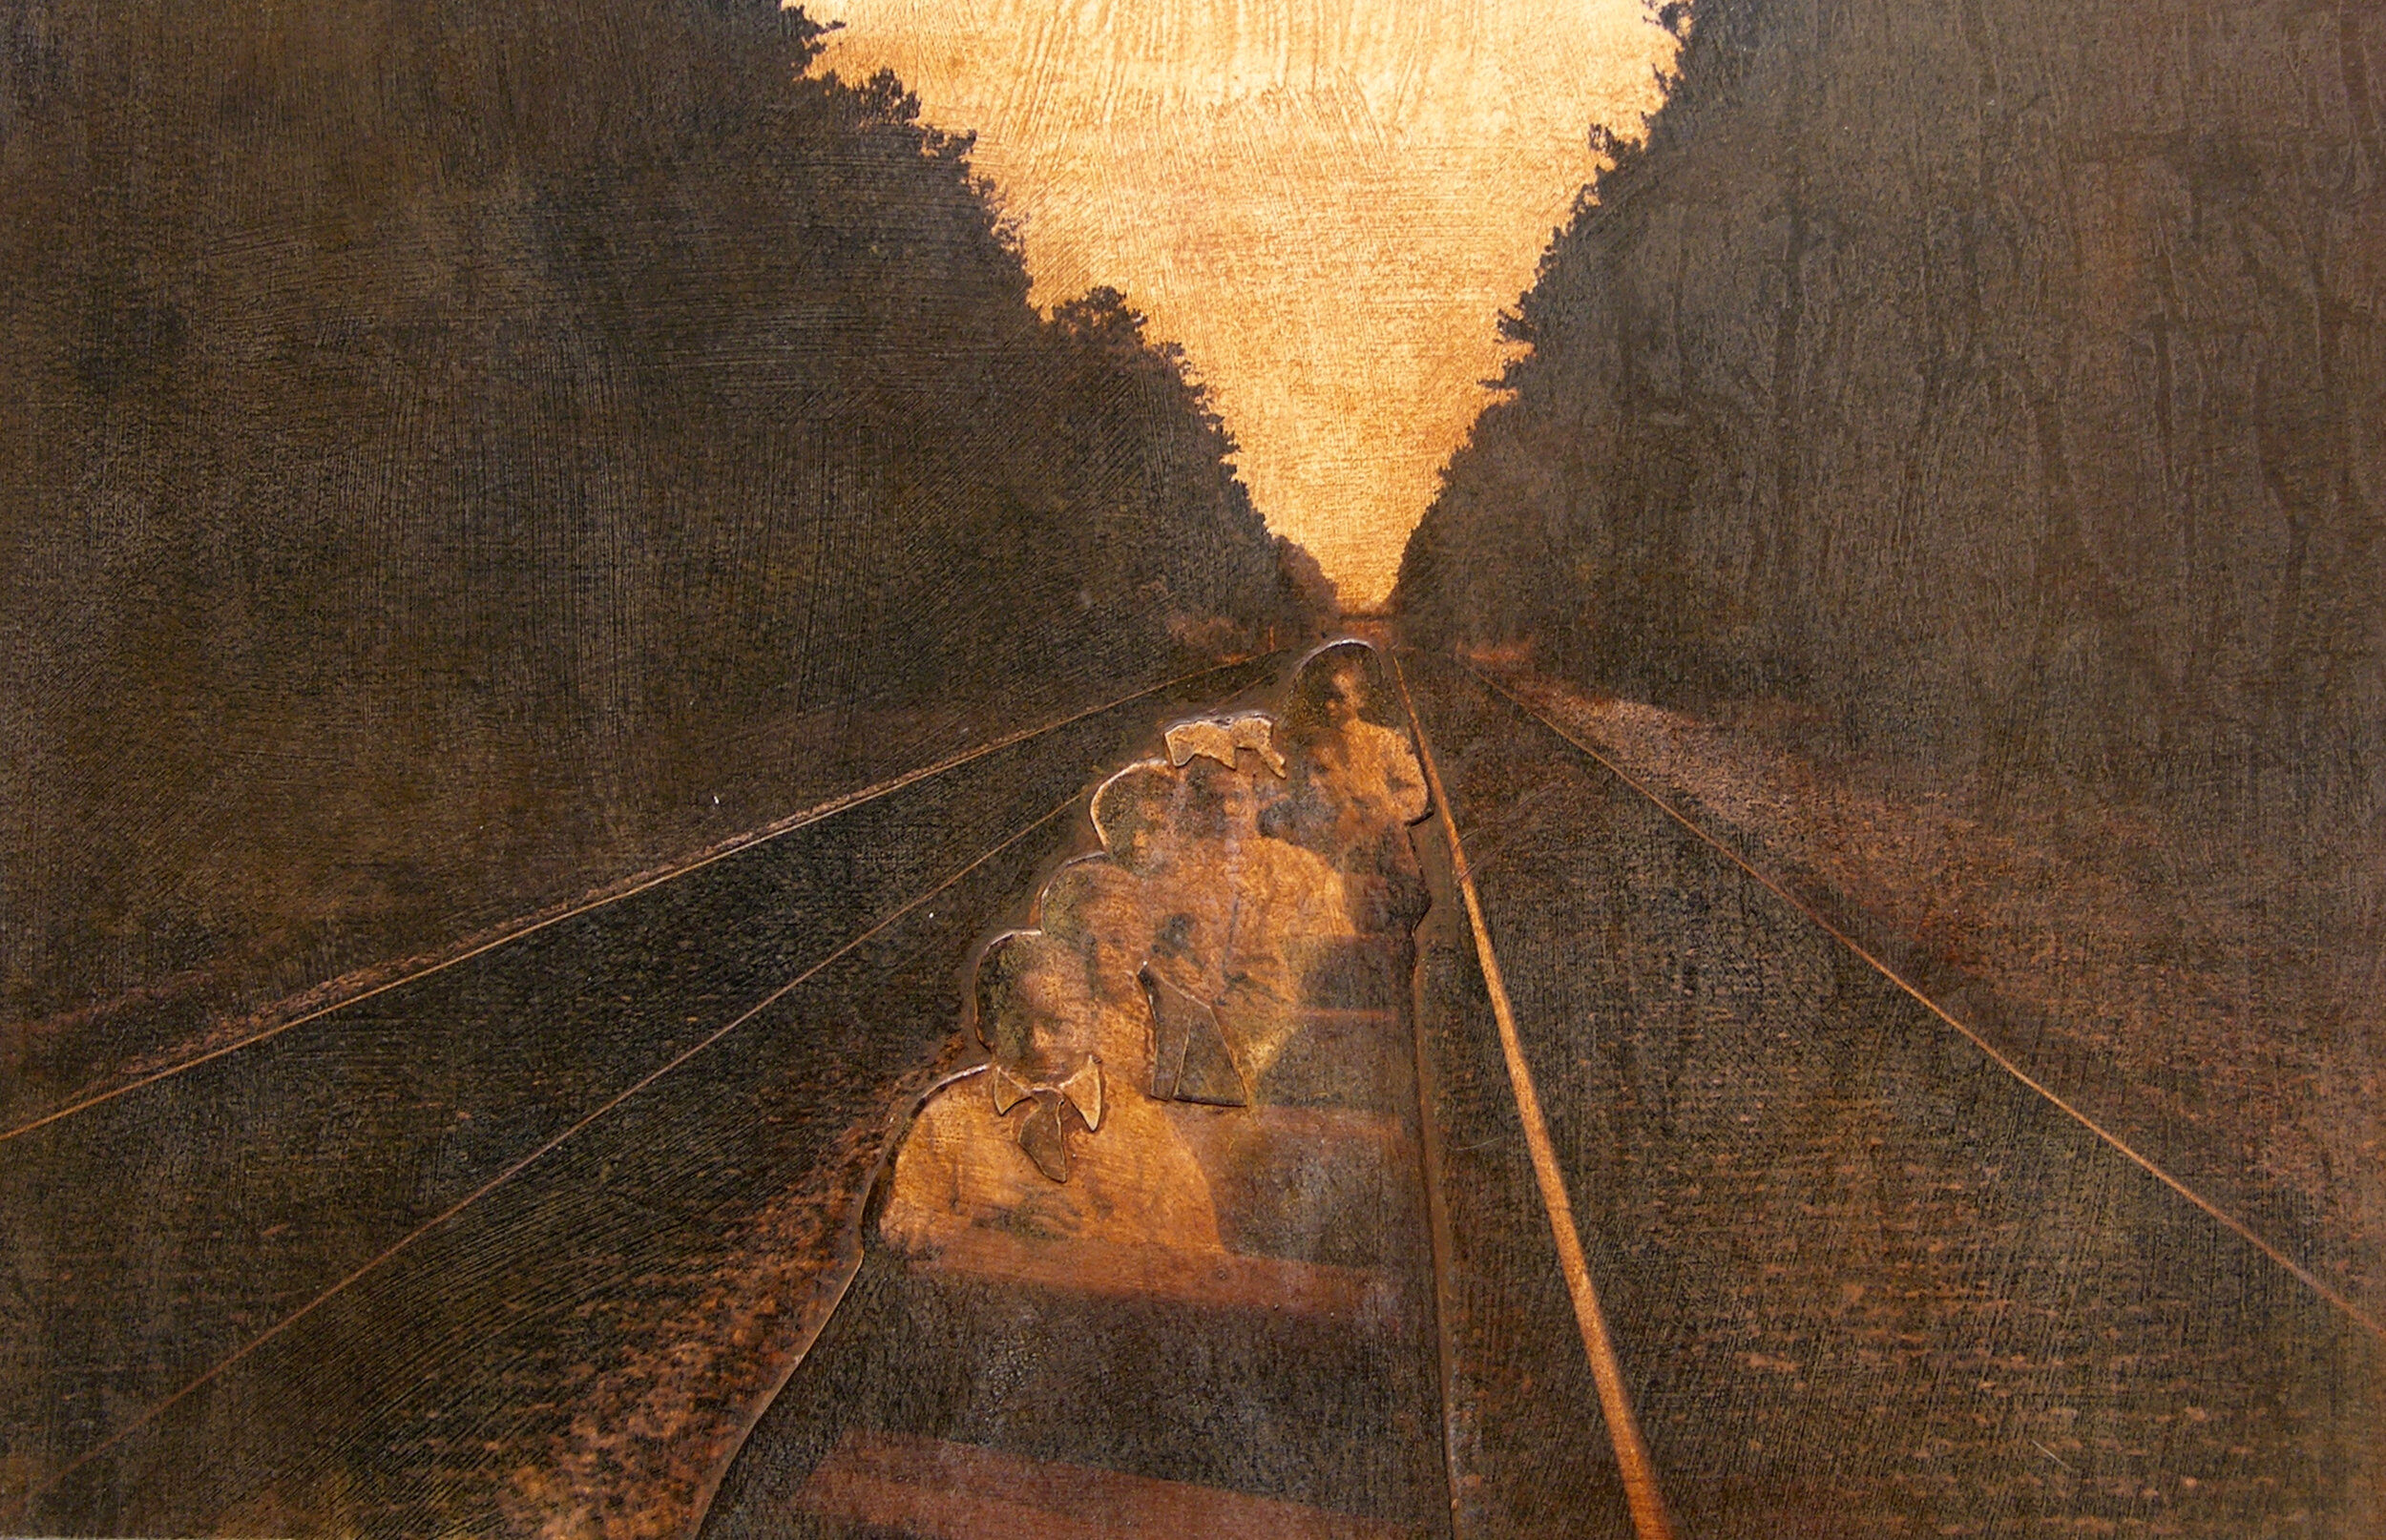 The Right Track, 2010 